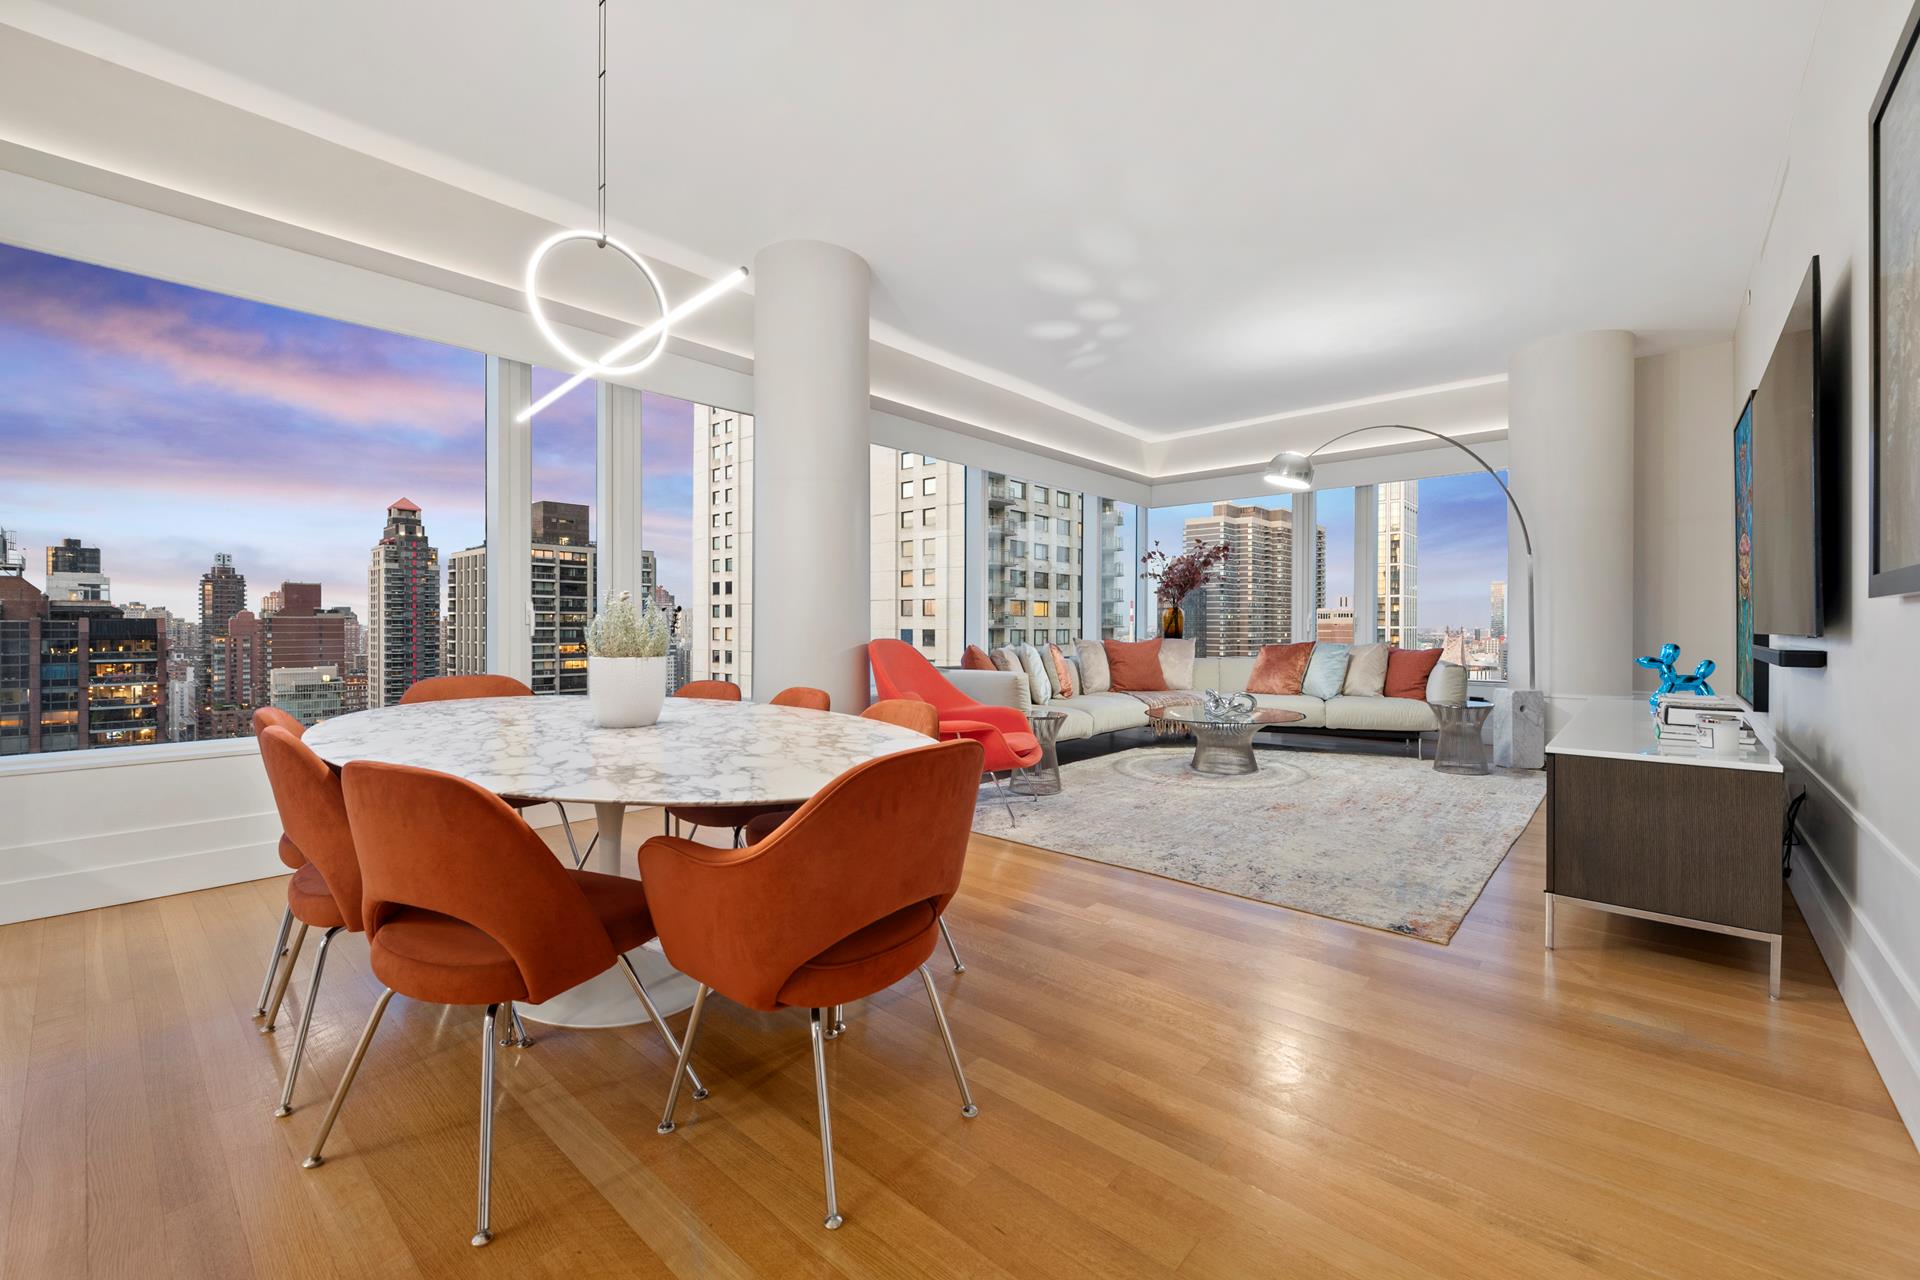 252 East 57th Street 37B, Sutton, Midtown East, NYC - 3 Bedrooms  
3 Bathrooms  
5 Rooms - 